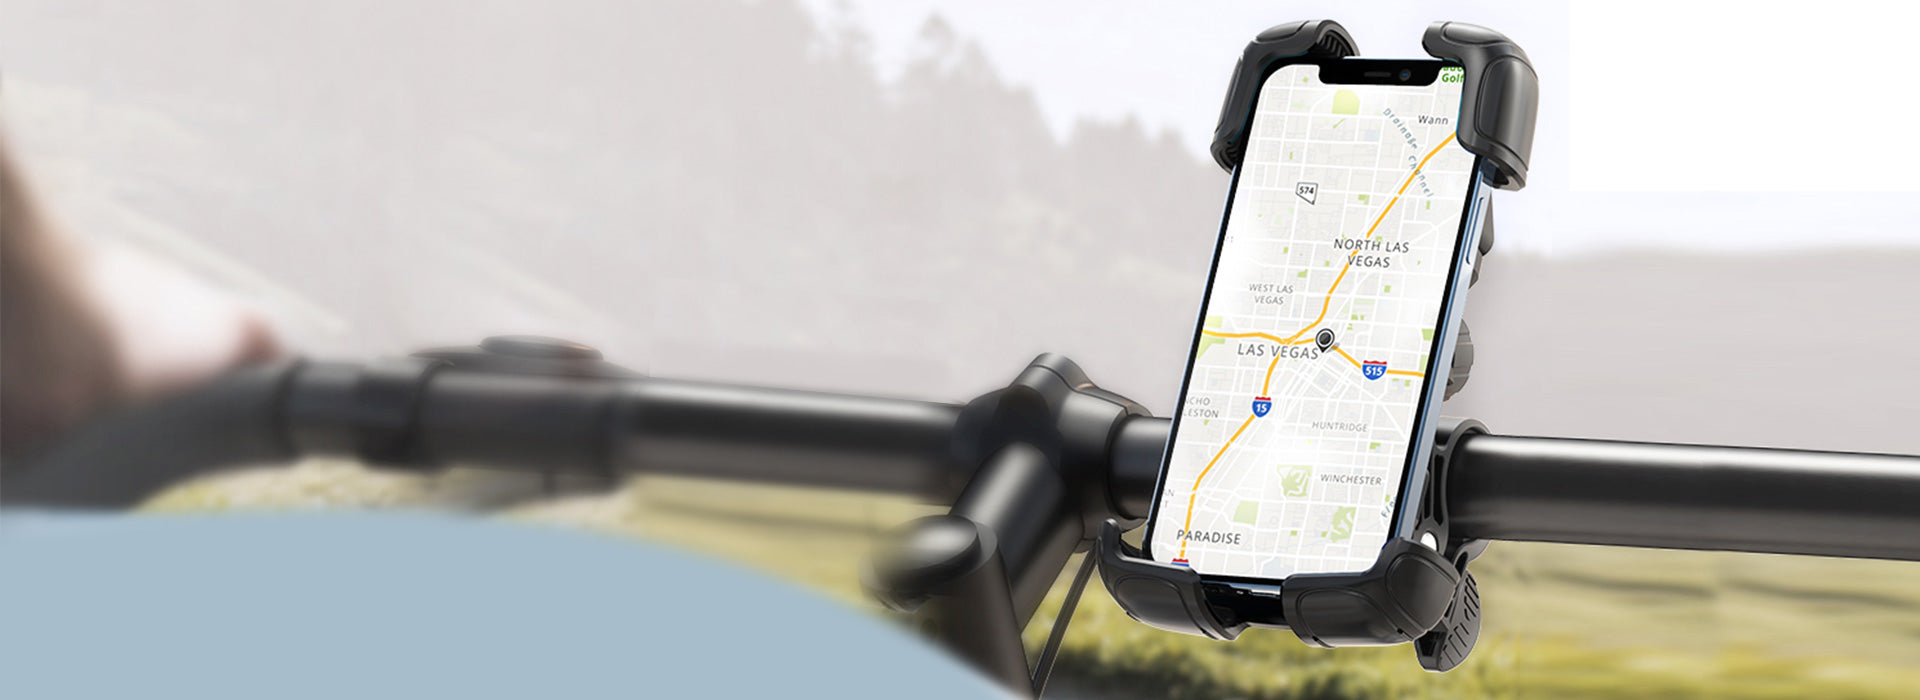 Bike and Motorcycle Phone Mount Shopping Guide